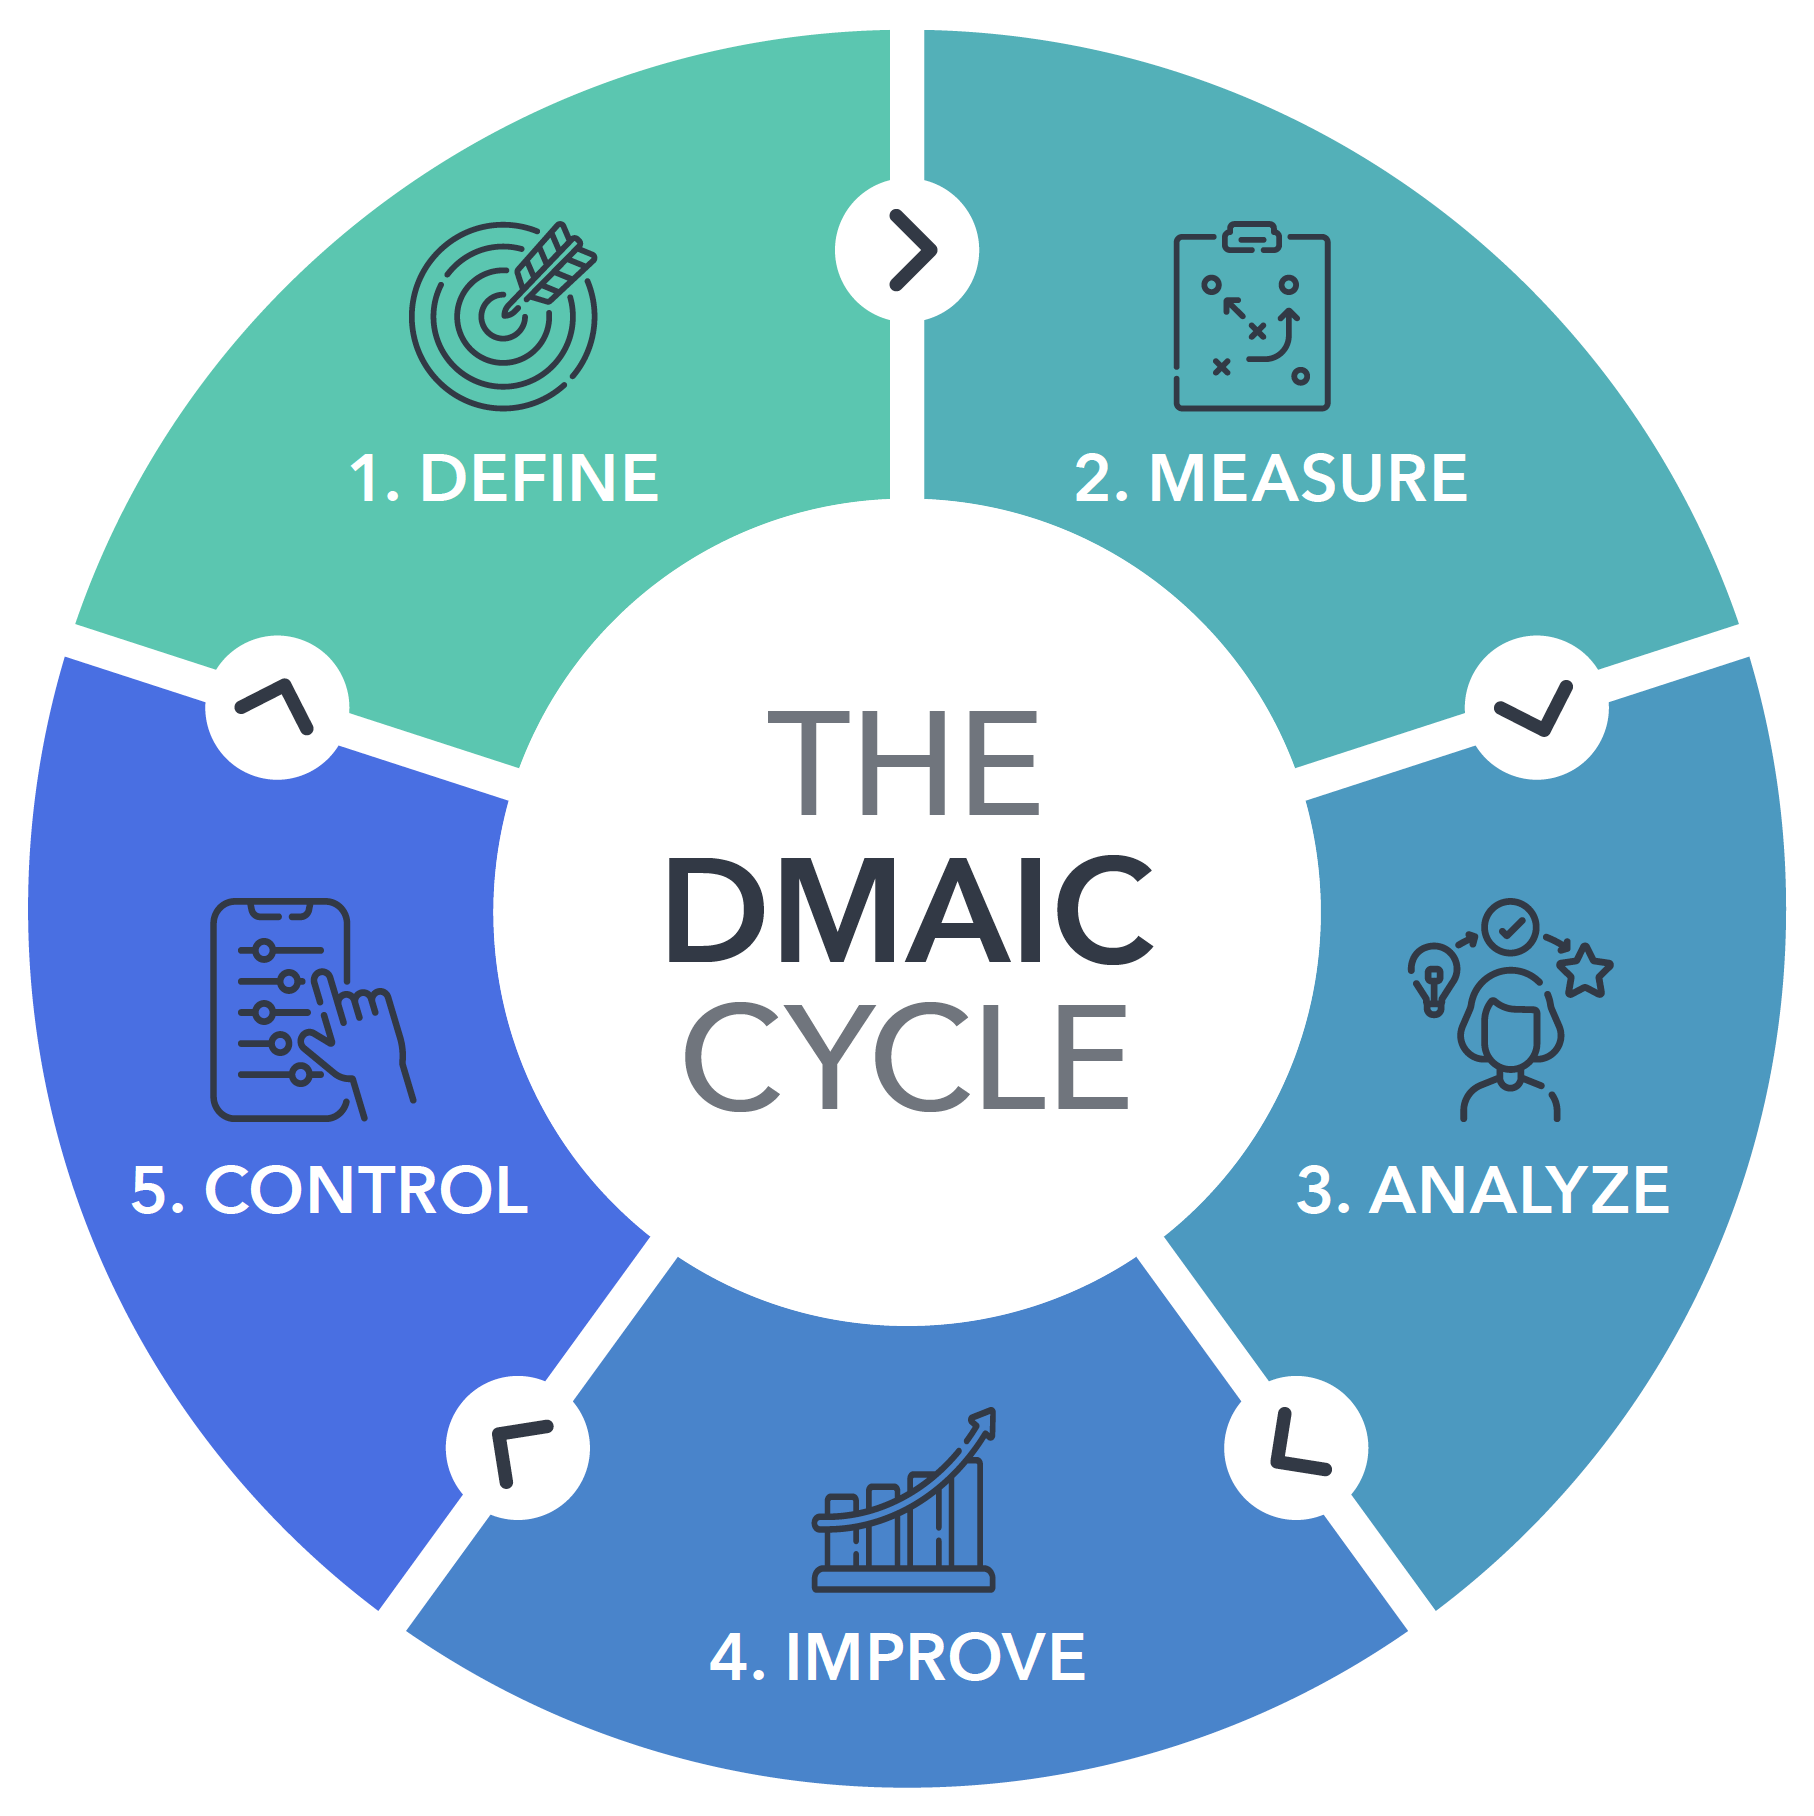 The 5 steps of the DMAIC cycle; define, measure, analyze, improve and control.